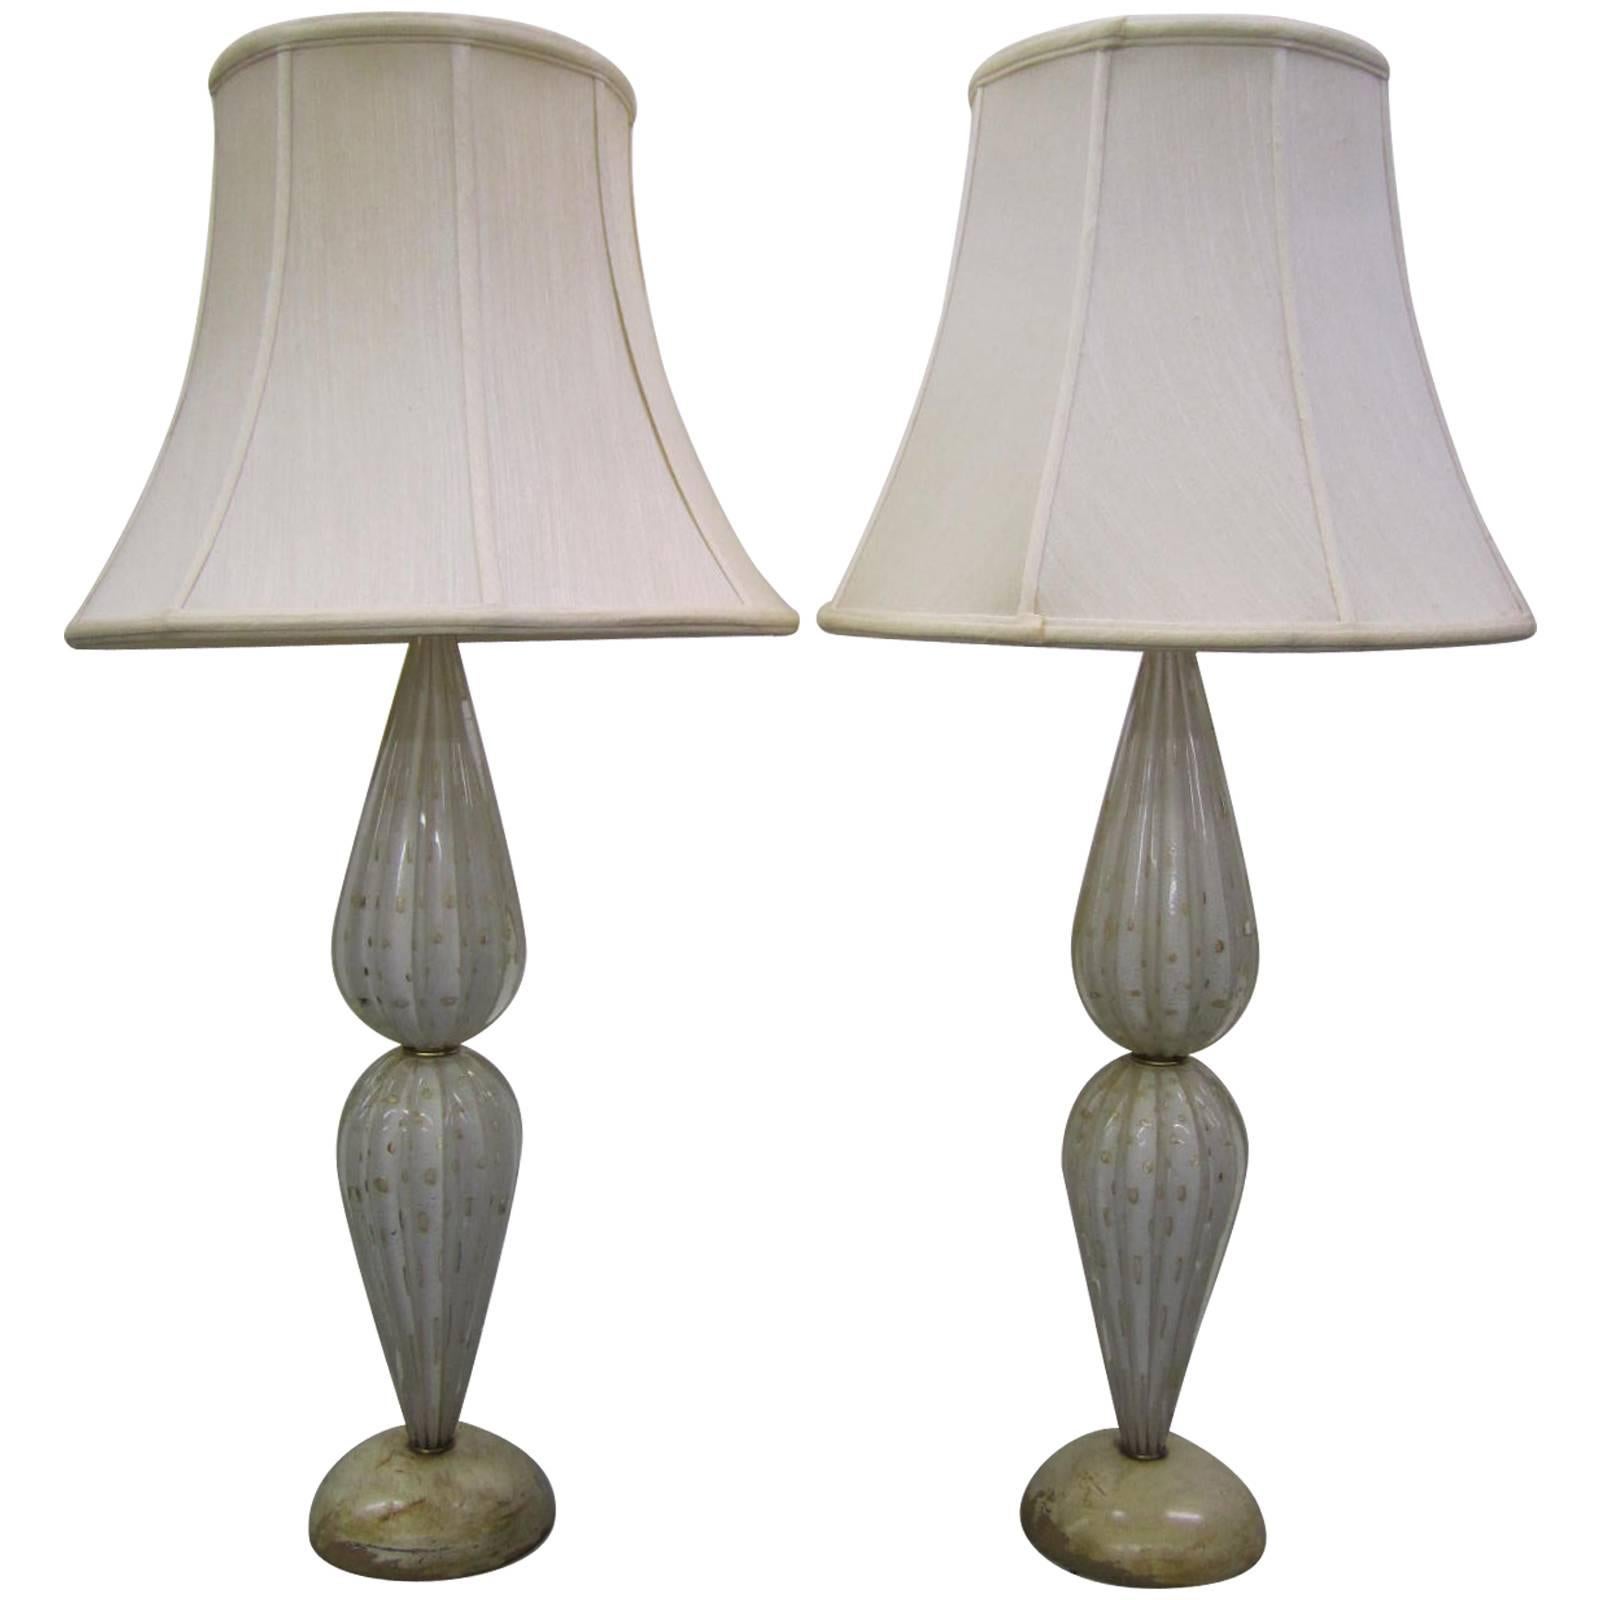 Stunning Pair of Barovier & Toso Murano Lamps with Gold Flecking For Sale